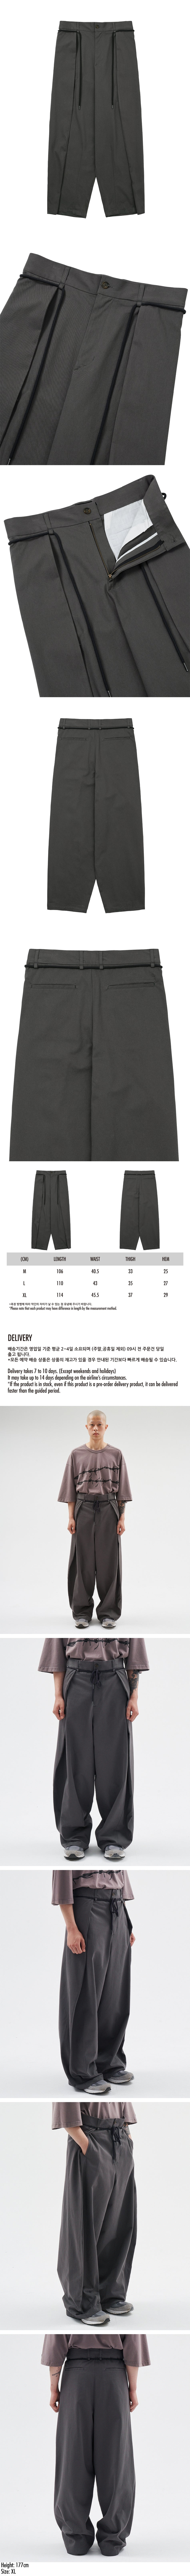 One Tuck Oversized Cotton Pants (CHARCOAL)